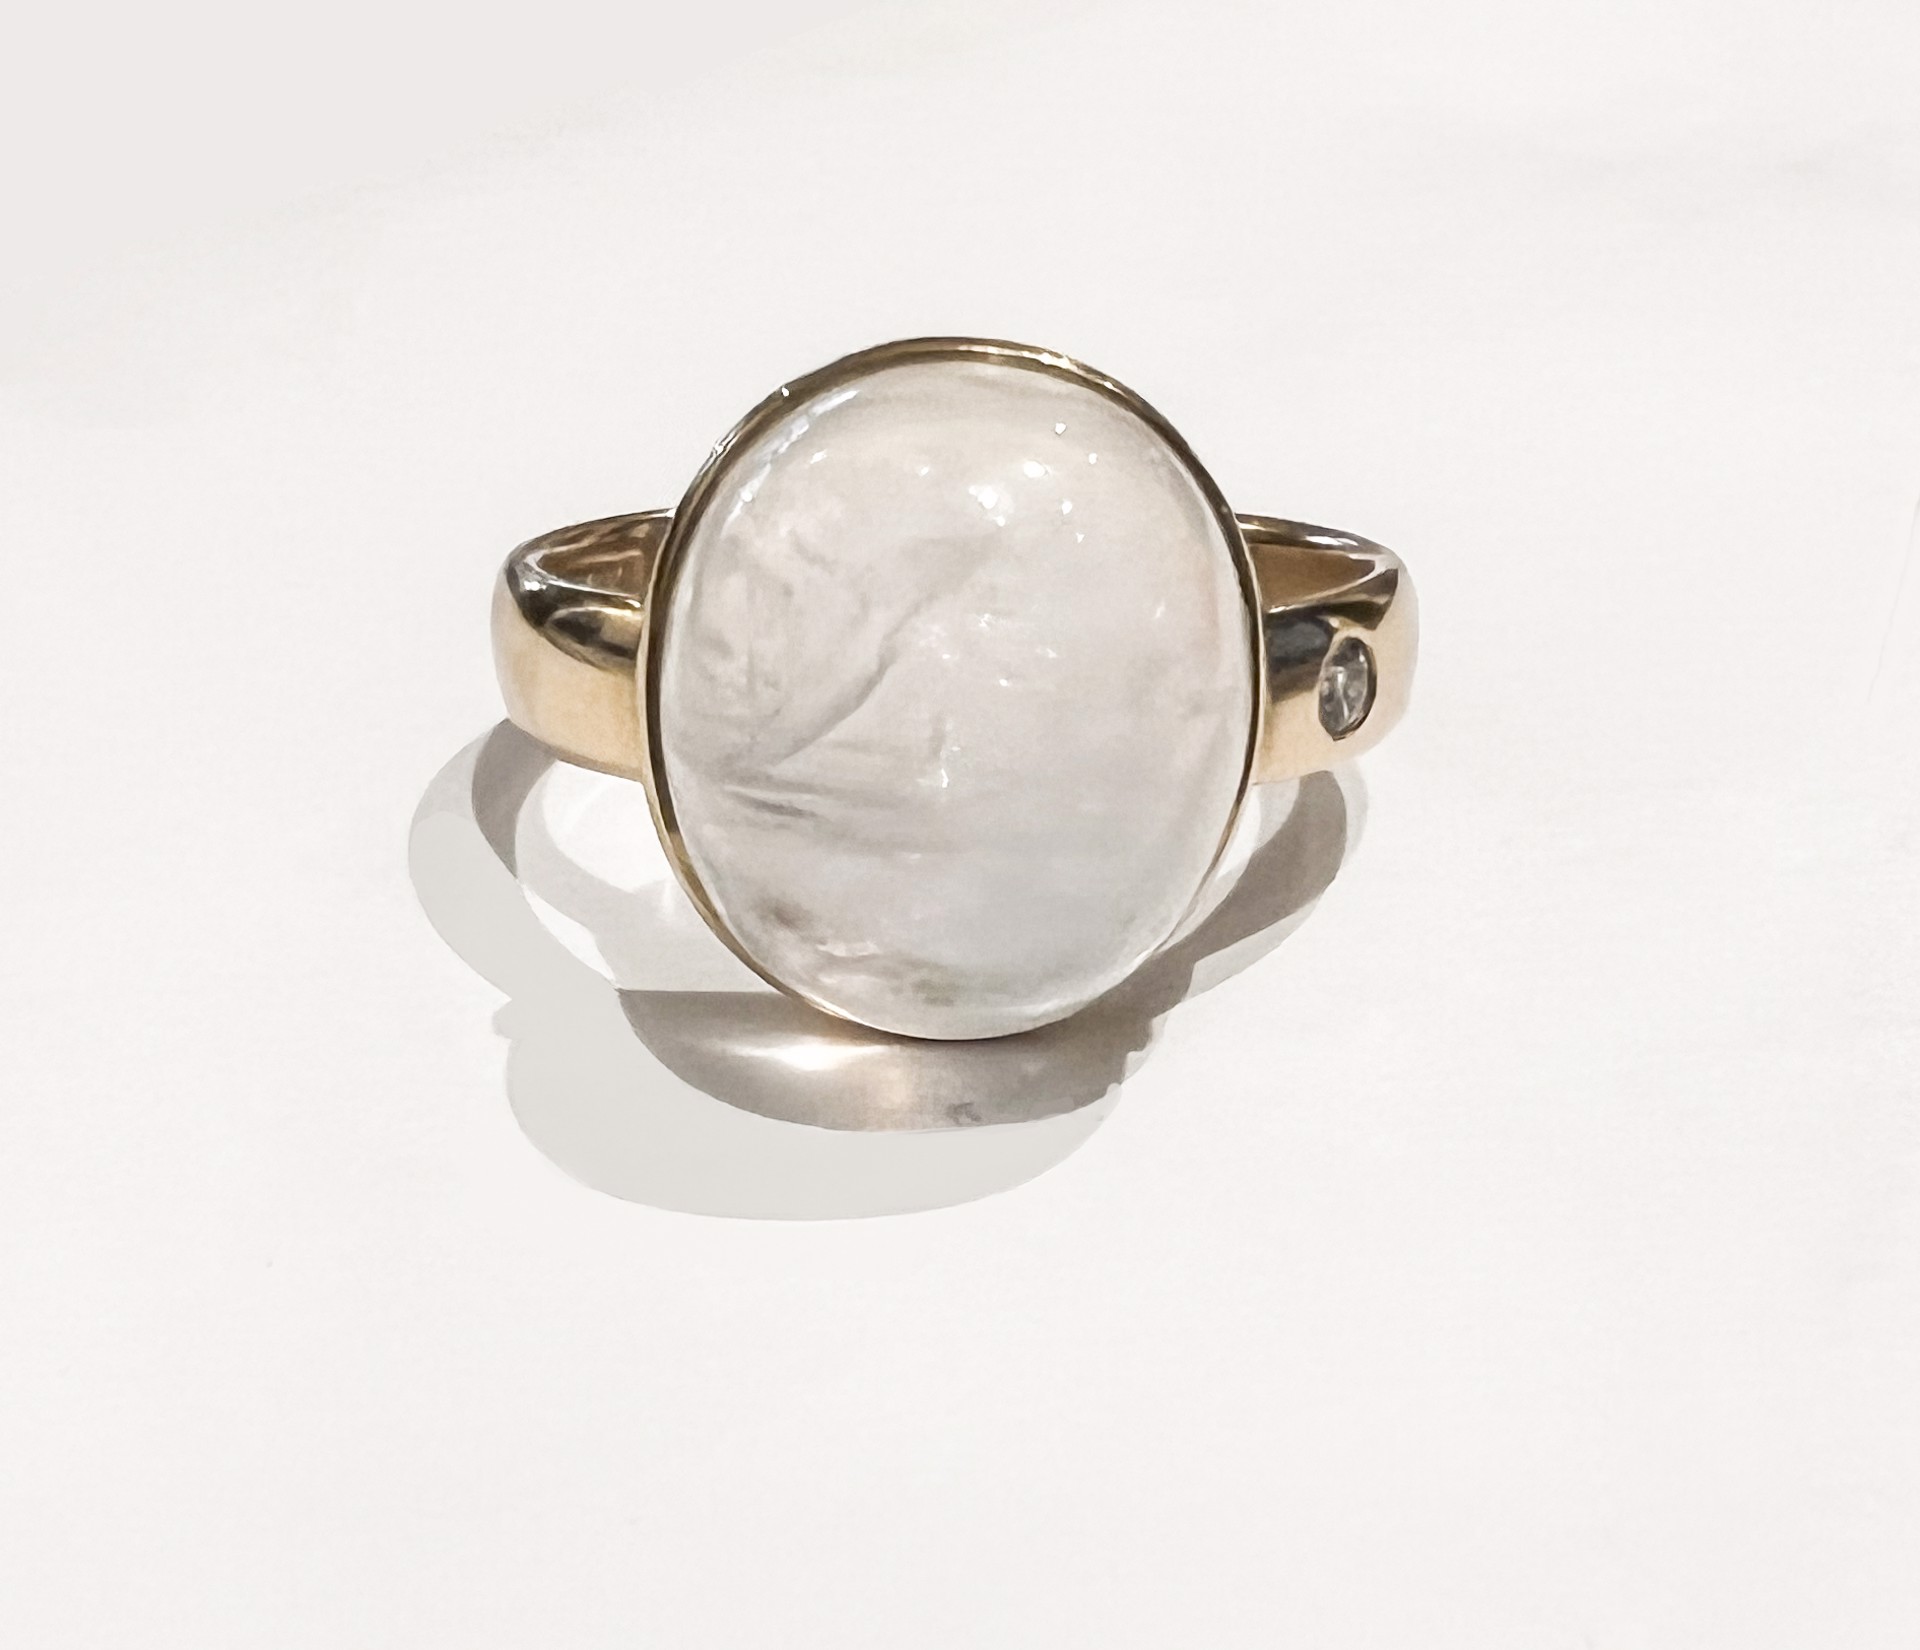 Moonstone Ring with Diamond by D'ETTE DELFORGE